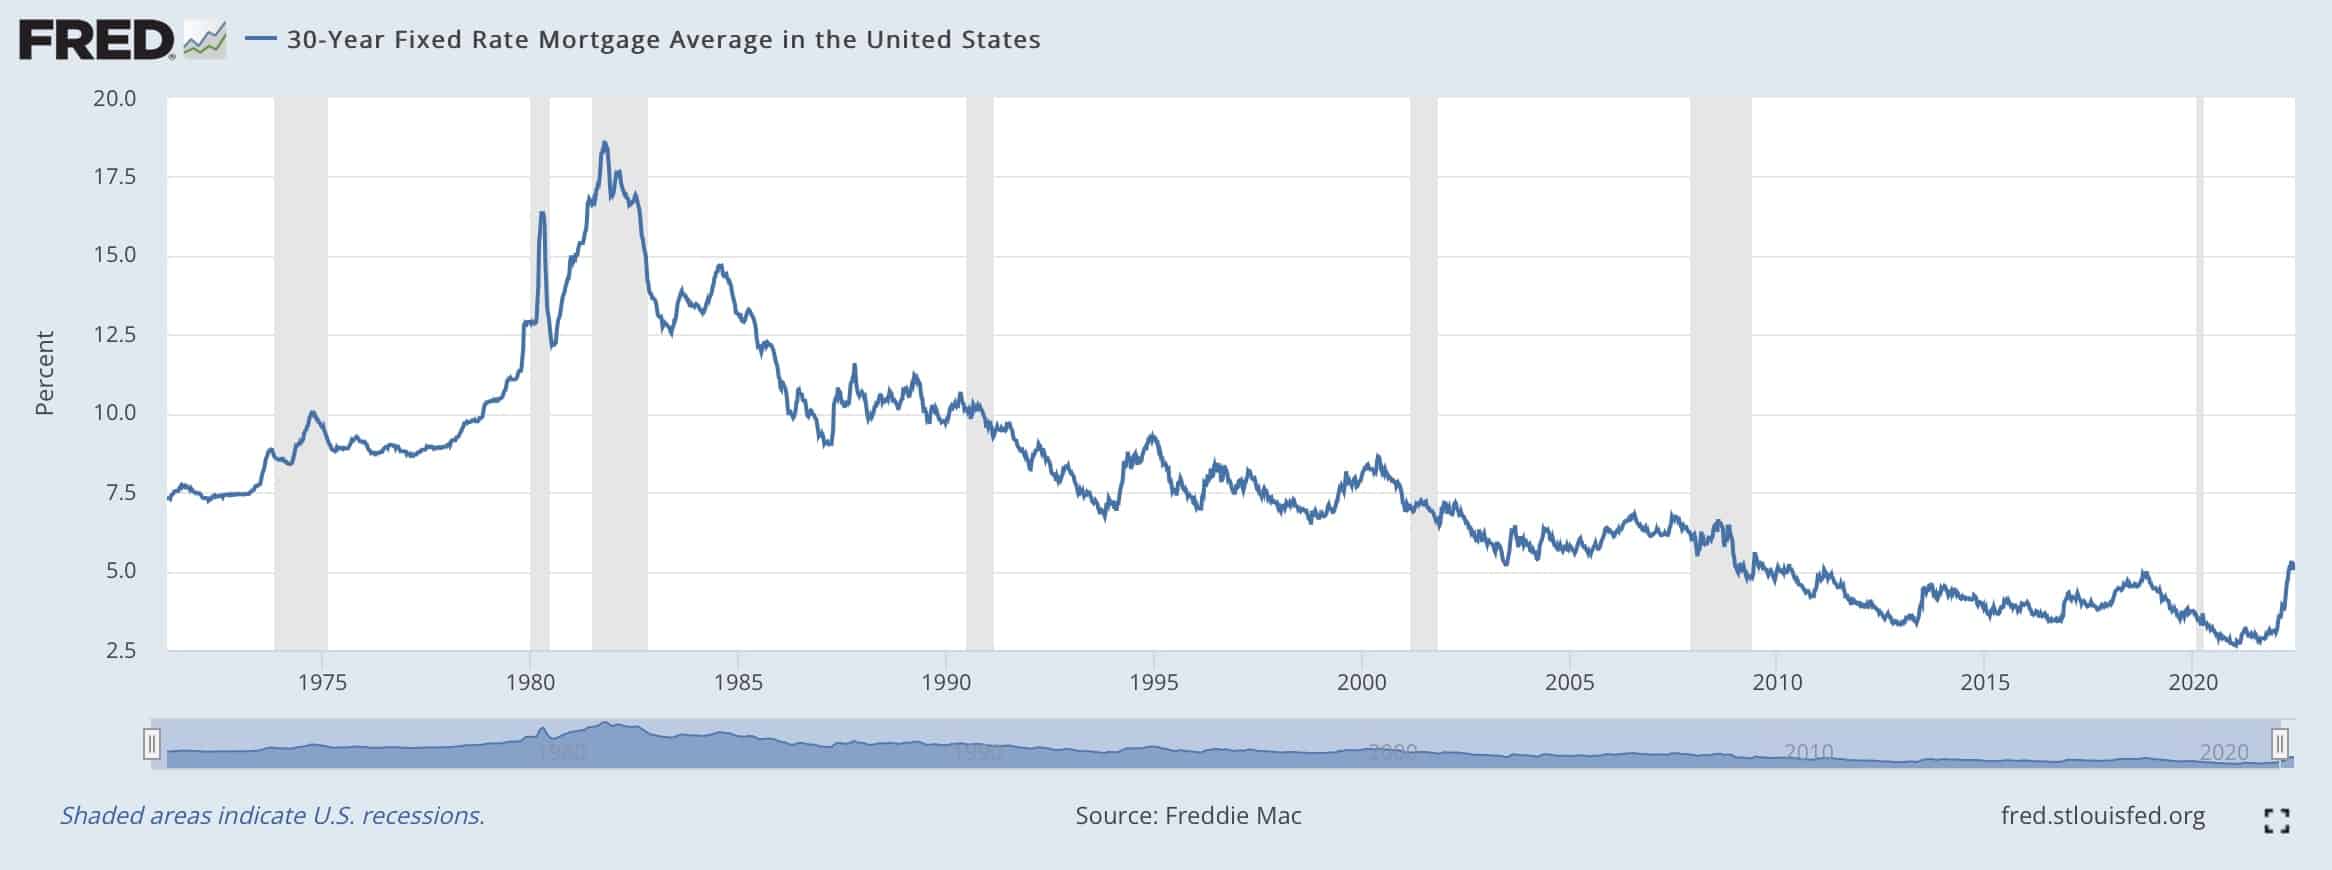 Historical mortgage rate trends